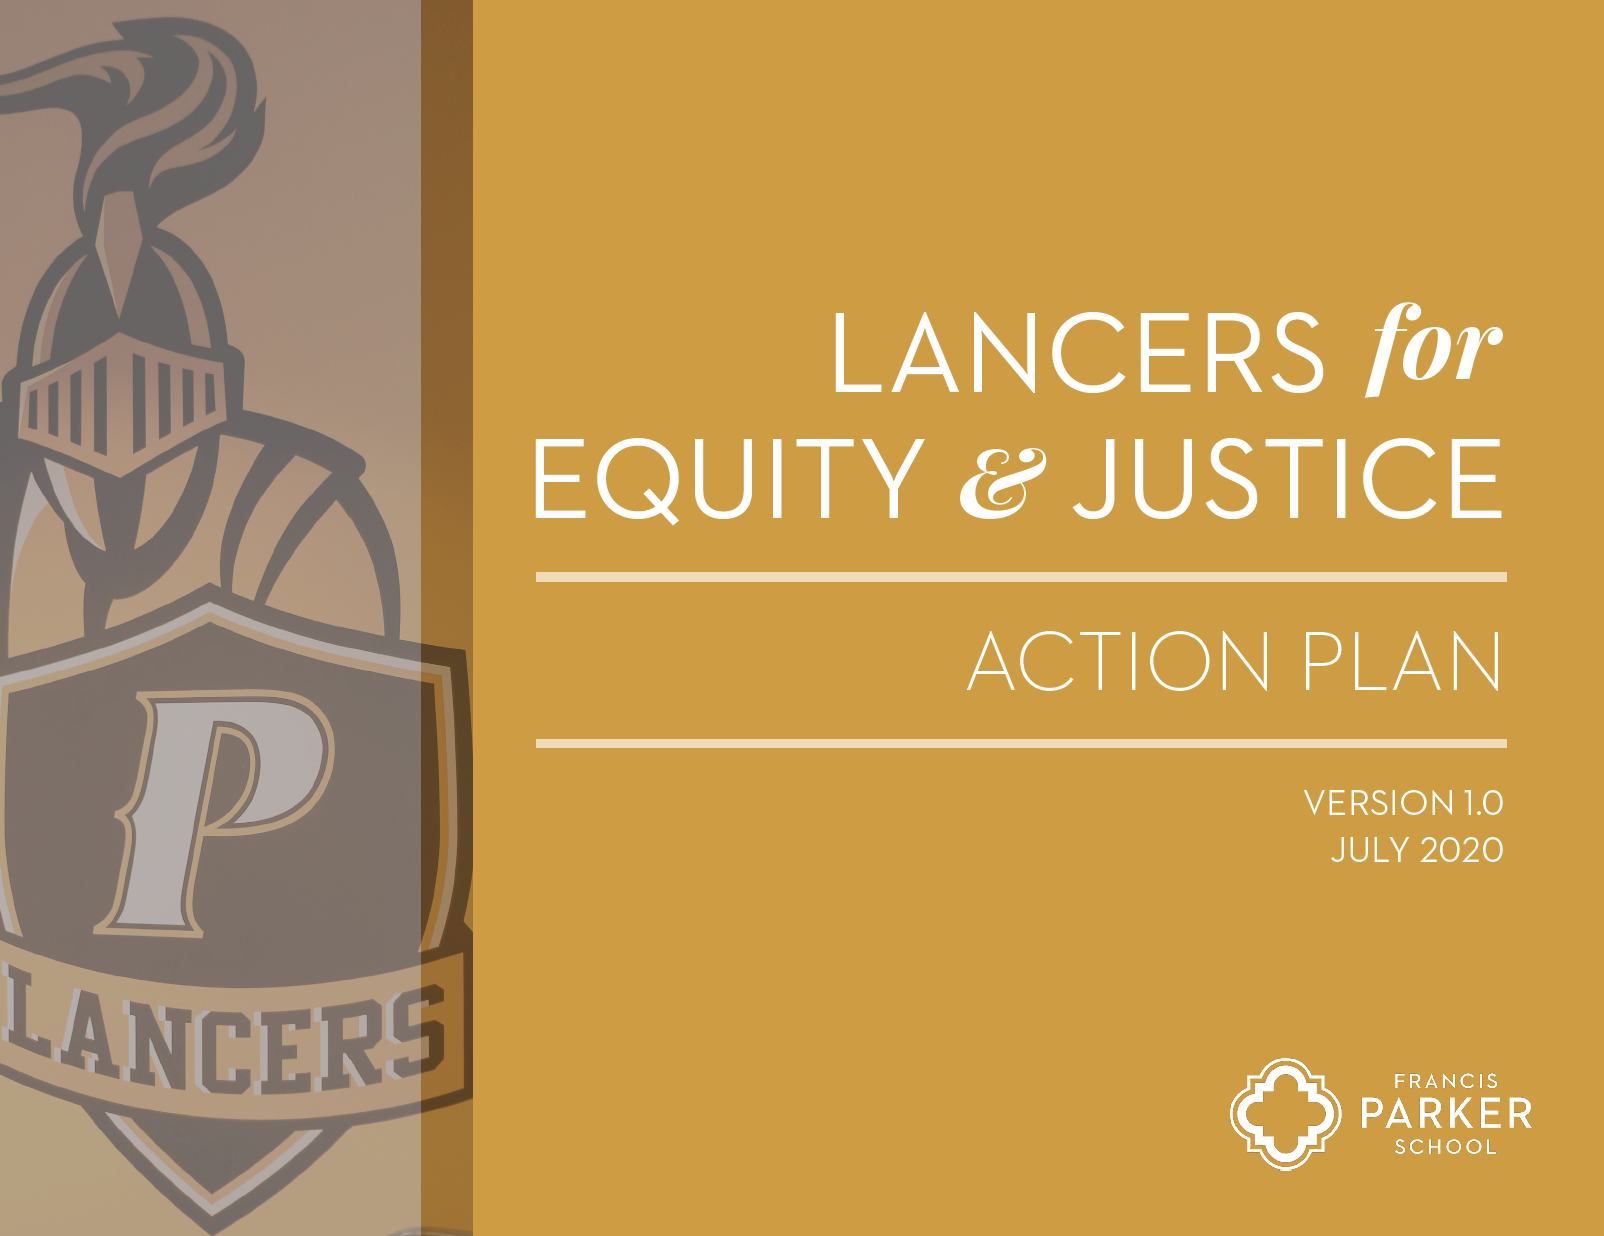 Lancers for Equity and Justice Action Plan provides a framework for ...